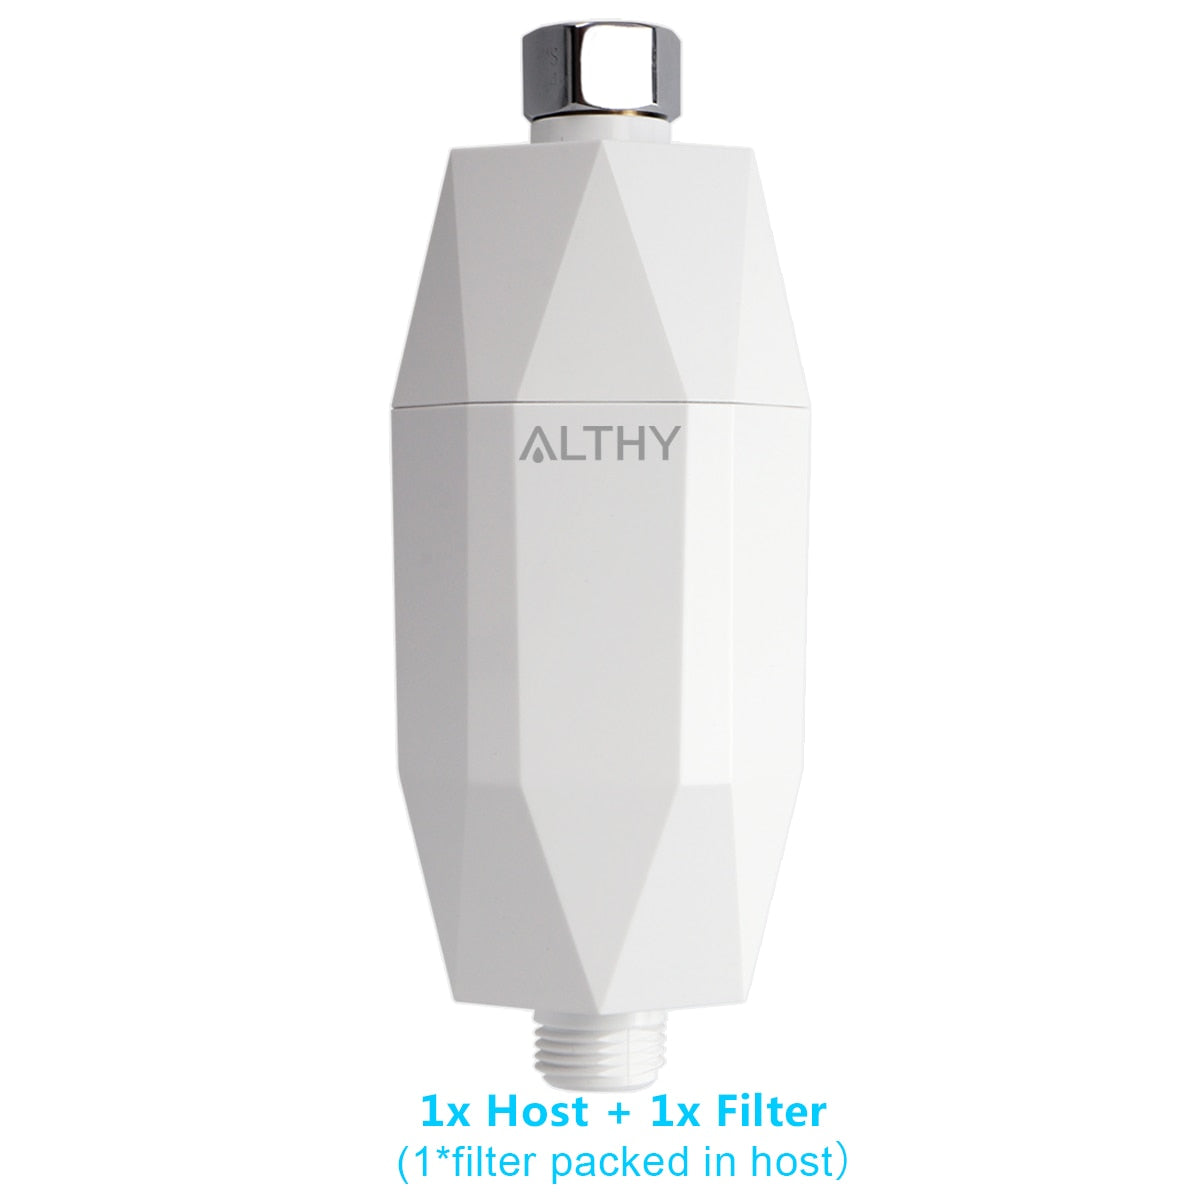 ALTHY Vitamin C Revitalizing Shower Water Filter - Reduces Dry Itchy Skin, Dandruff, Eczema, Dramatically & Improves Skin, Hair HostandFilterChina Hardware > Plumbing > Water Dispensing & Filtration 138.52 EZYSELLA SHOP